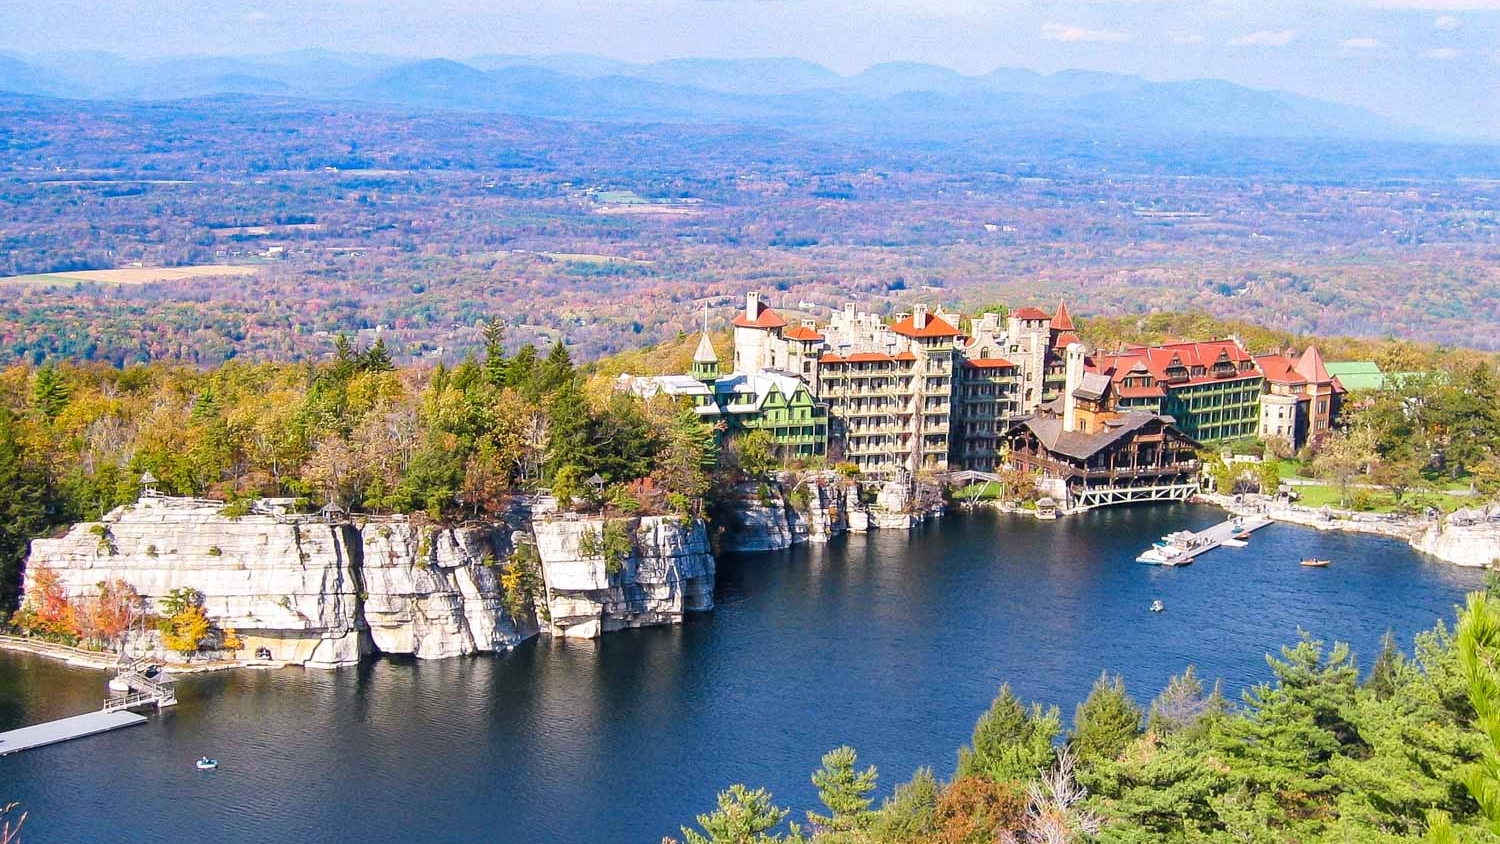 Mohonk Mountain House with view of the lake.